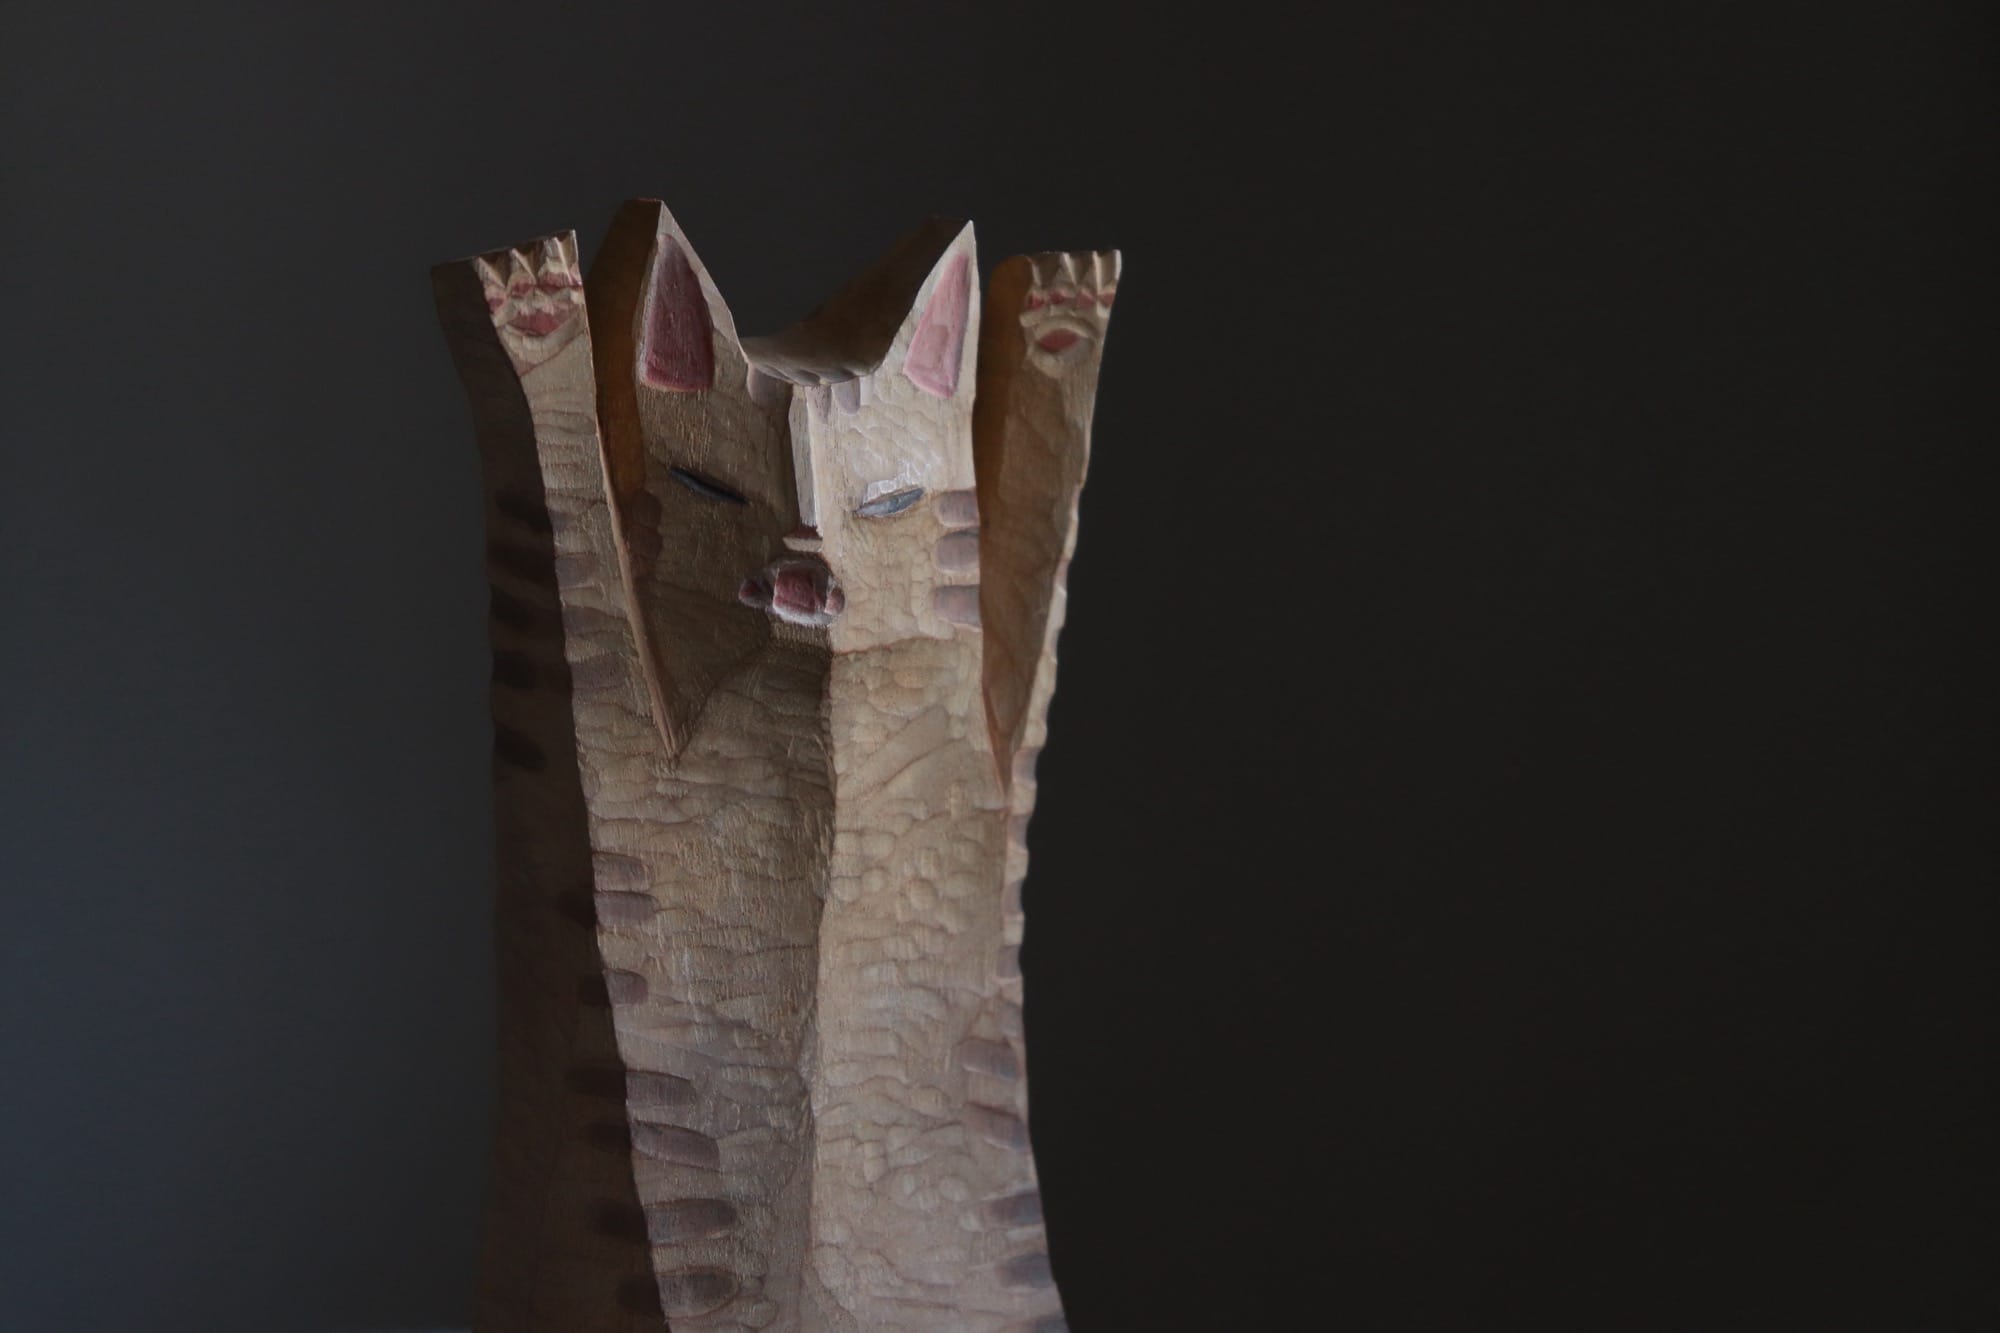 a wooden sculpture of a cartoonish cat, hissing and raising its front paws